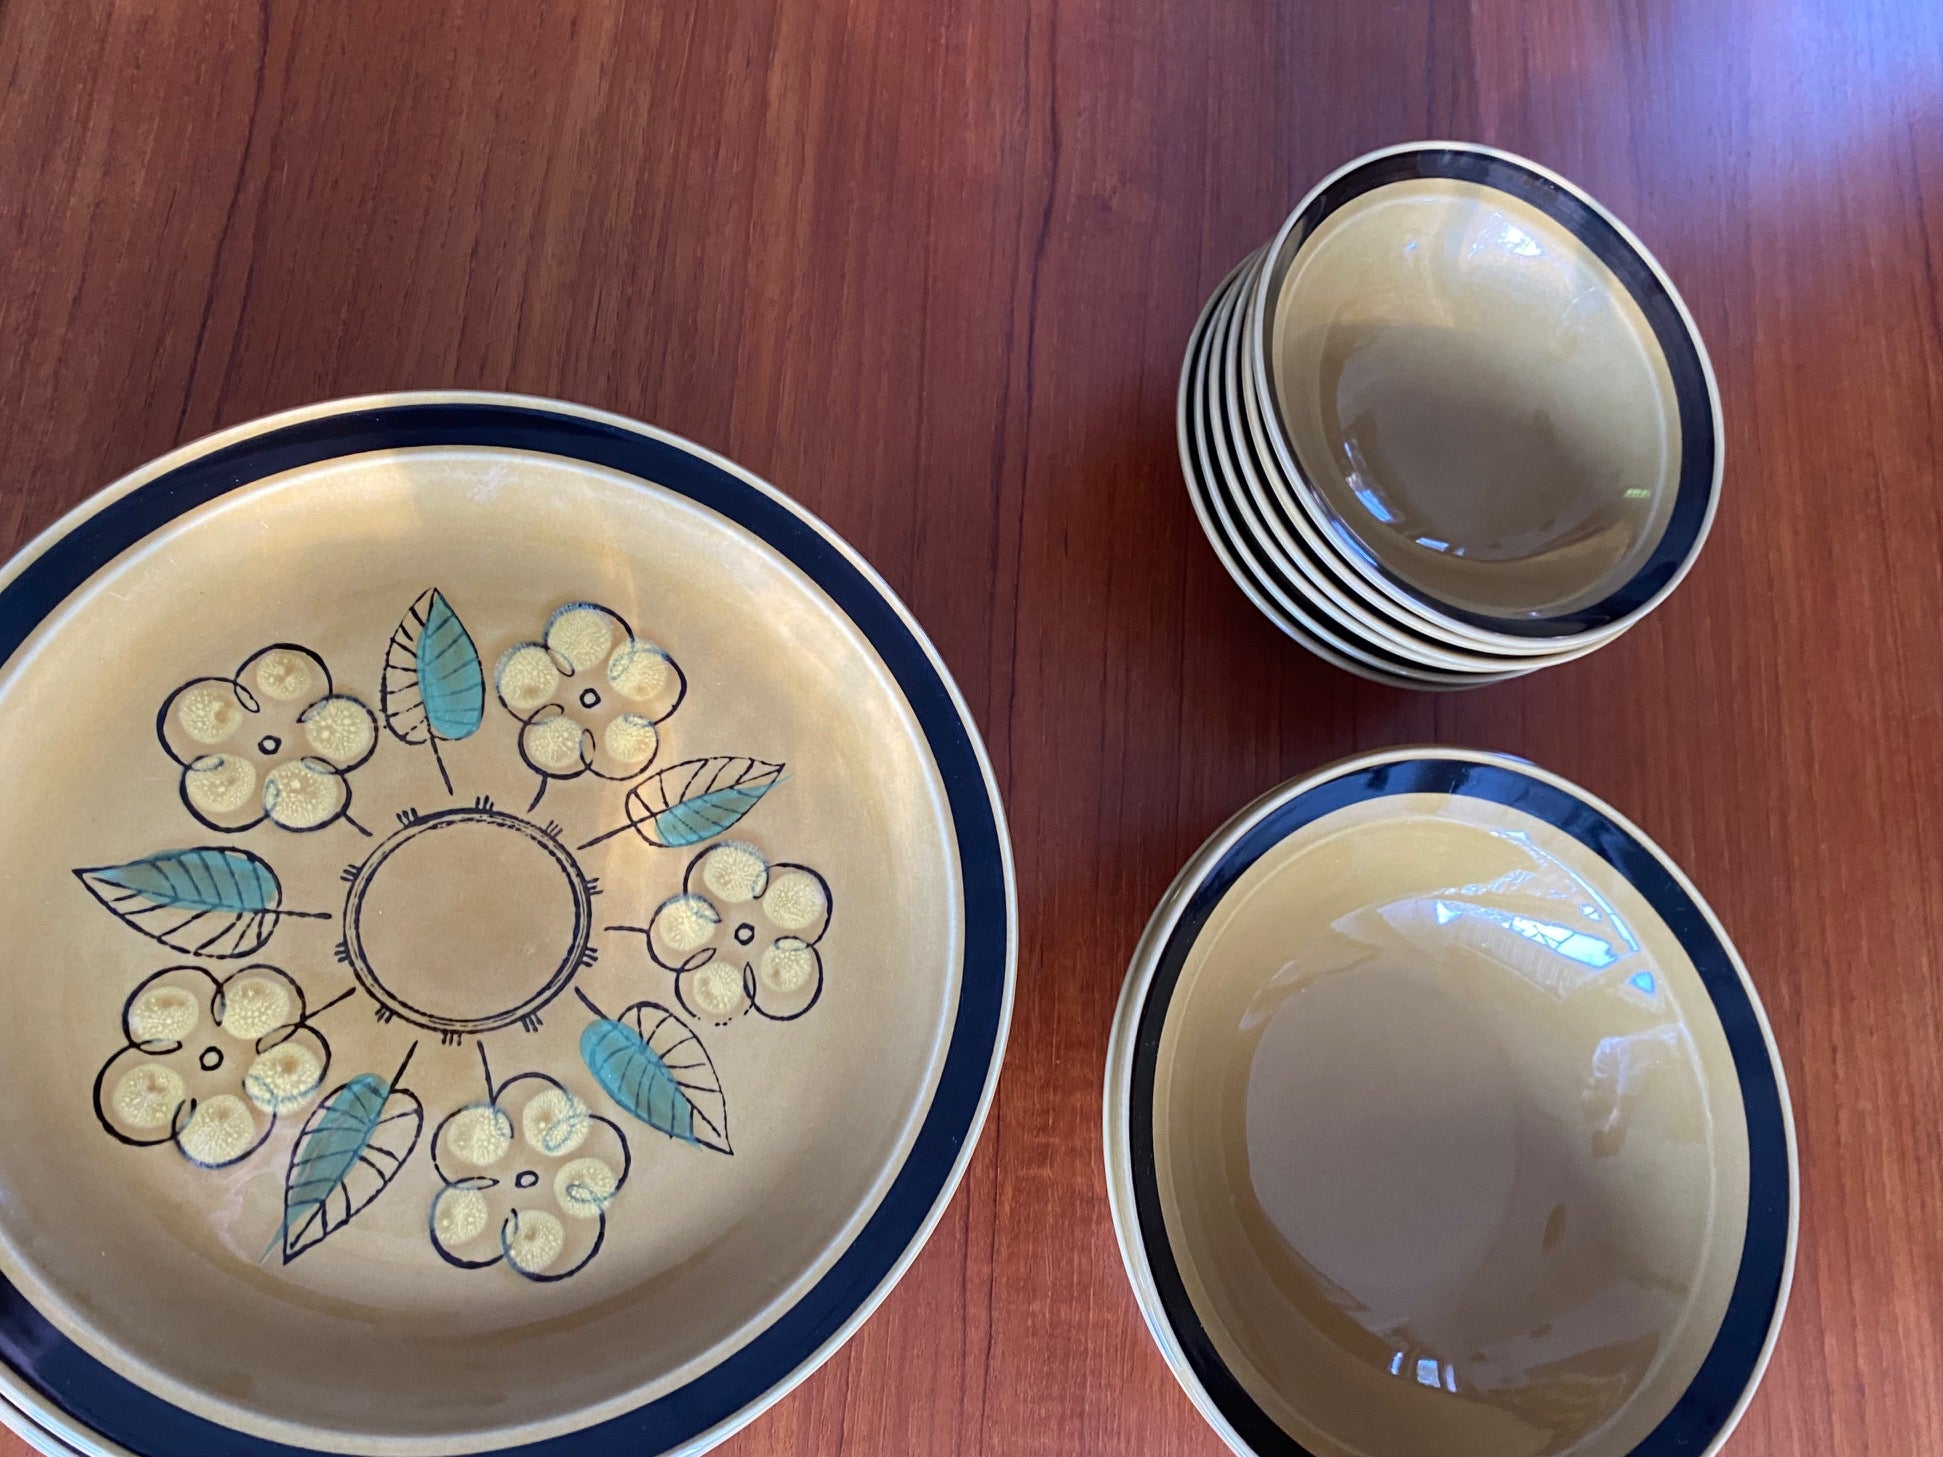 Fabulous Crest-Stone plates in gold, brown and yellow, "Lisa". Marked S-571. Made in Japan, seen with matching stoneware bowls- Cook Street Vintage